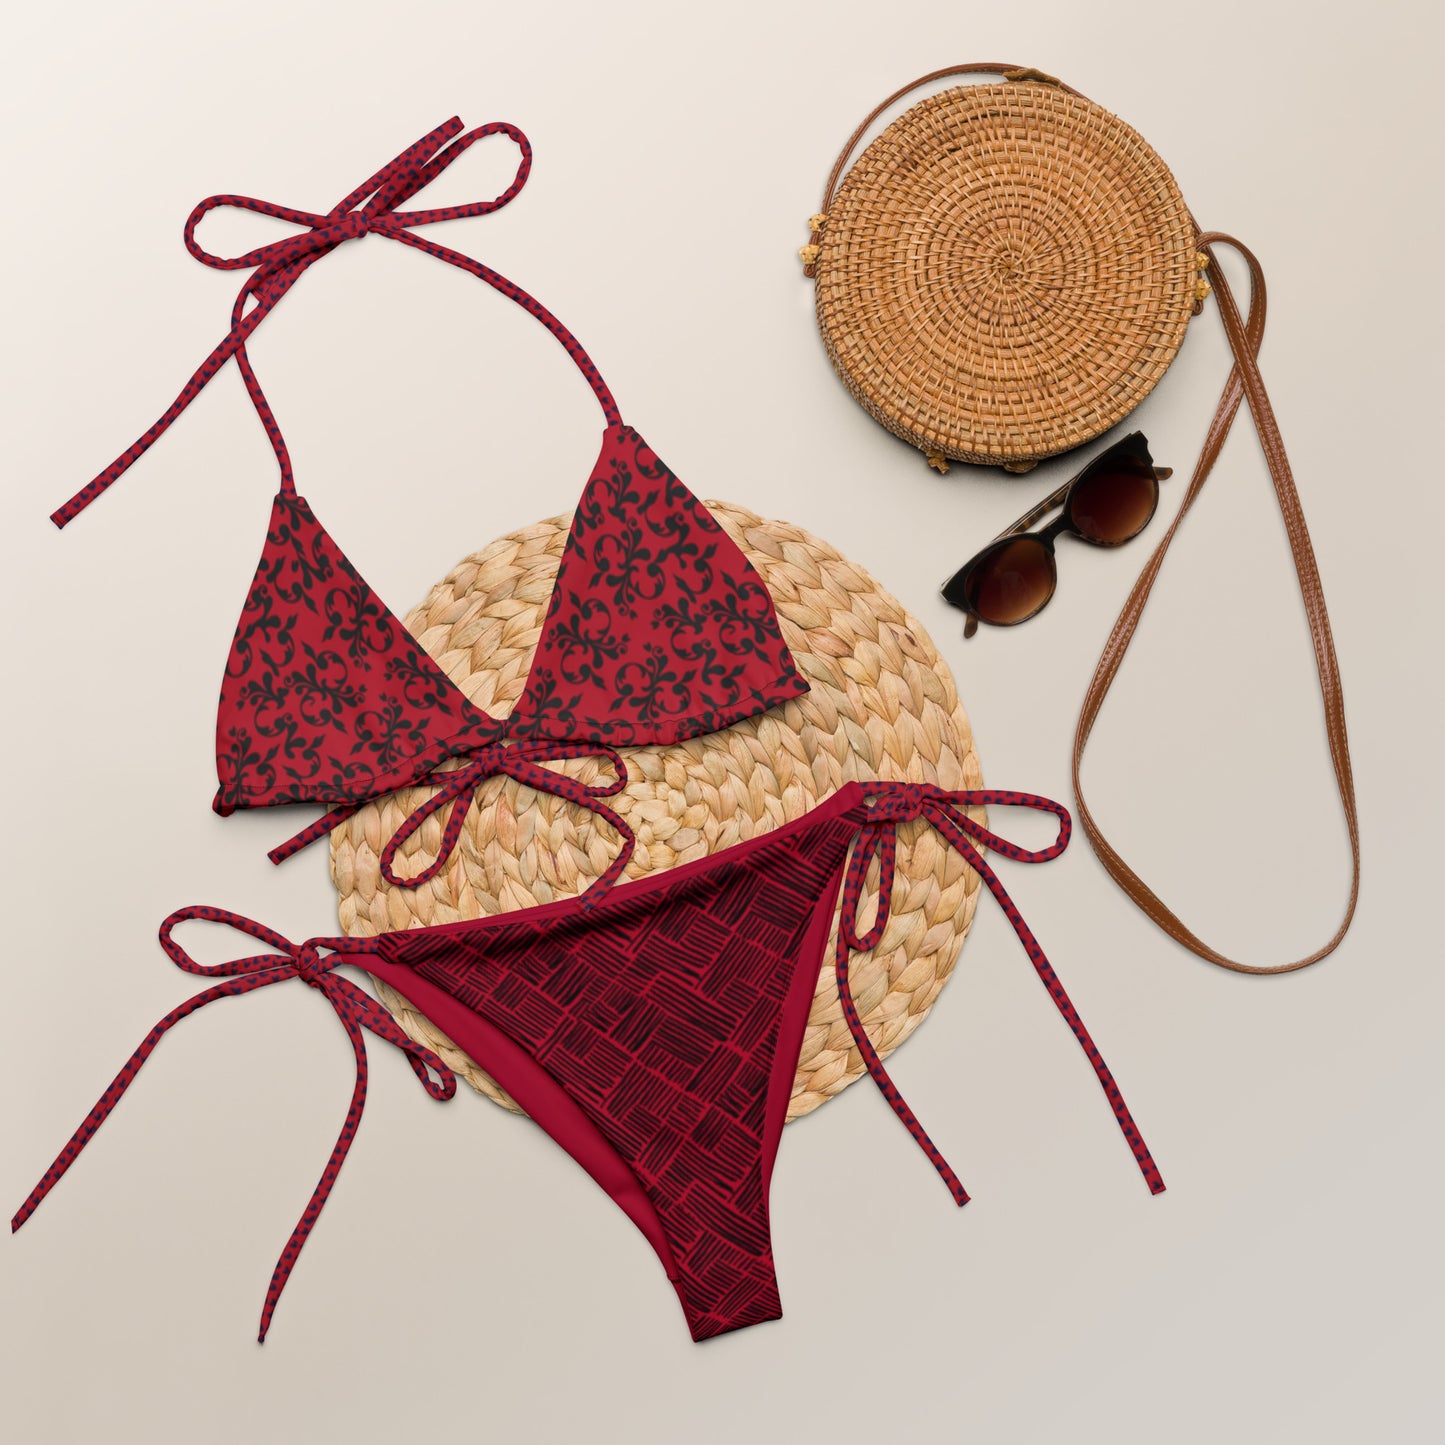 Caracas Collection Red recycled string bikini. Design hand-painted by the Designer Maria Alejandra Echenique